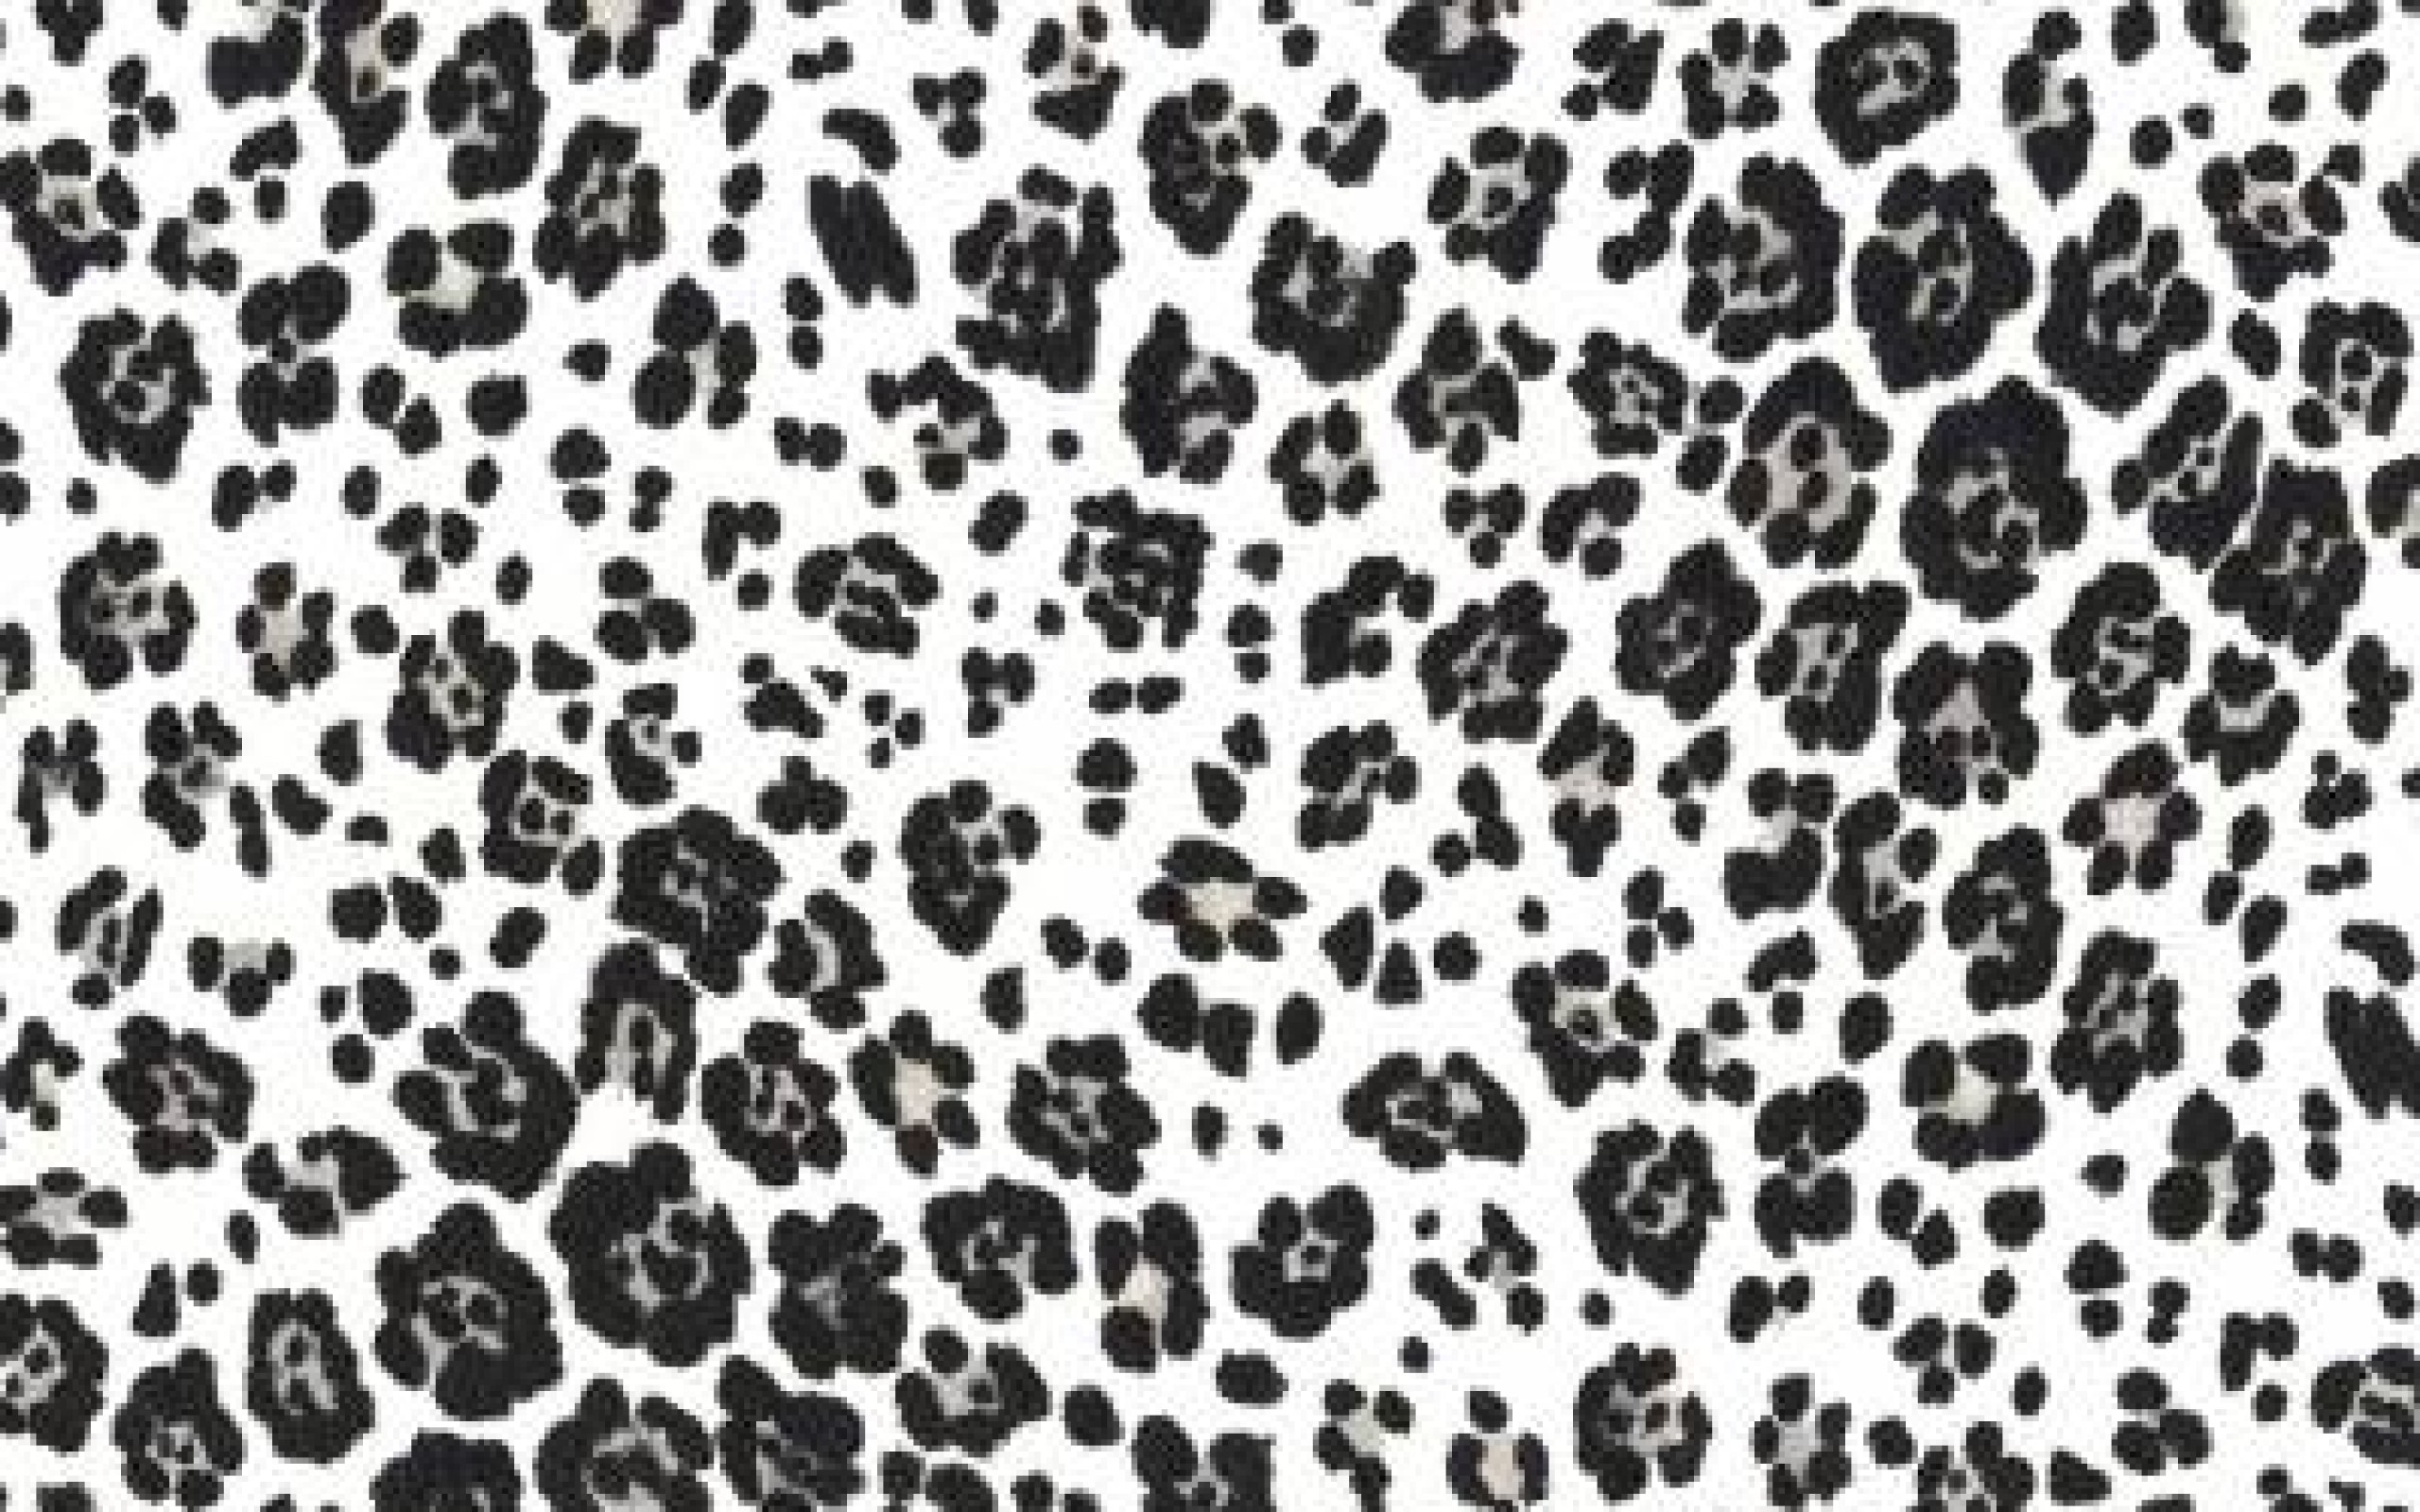 Black and White Leopard Print Wallpaper in High Resolution at Patterns